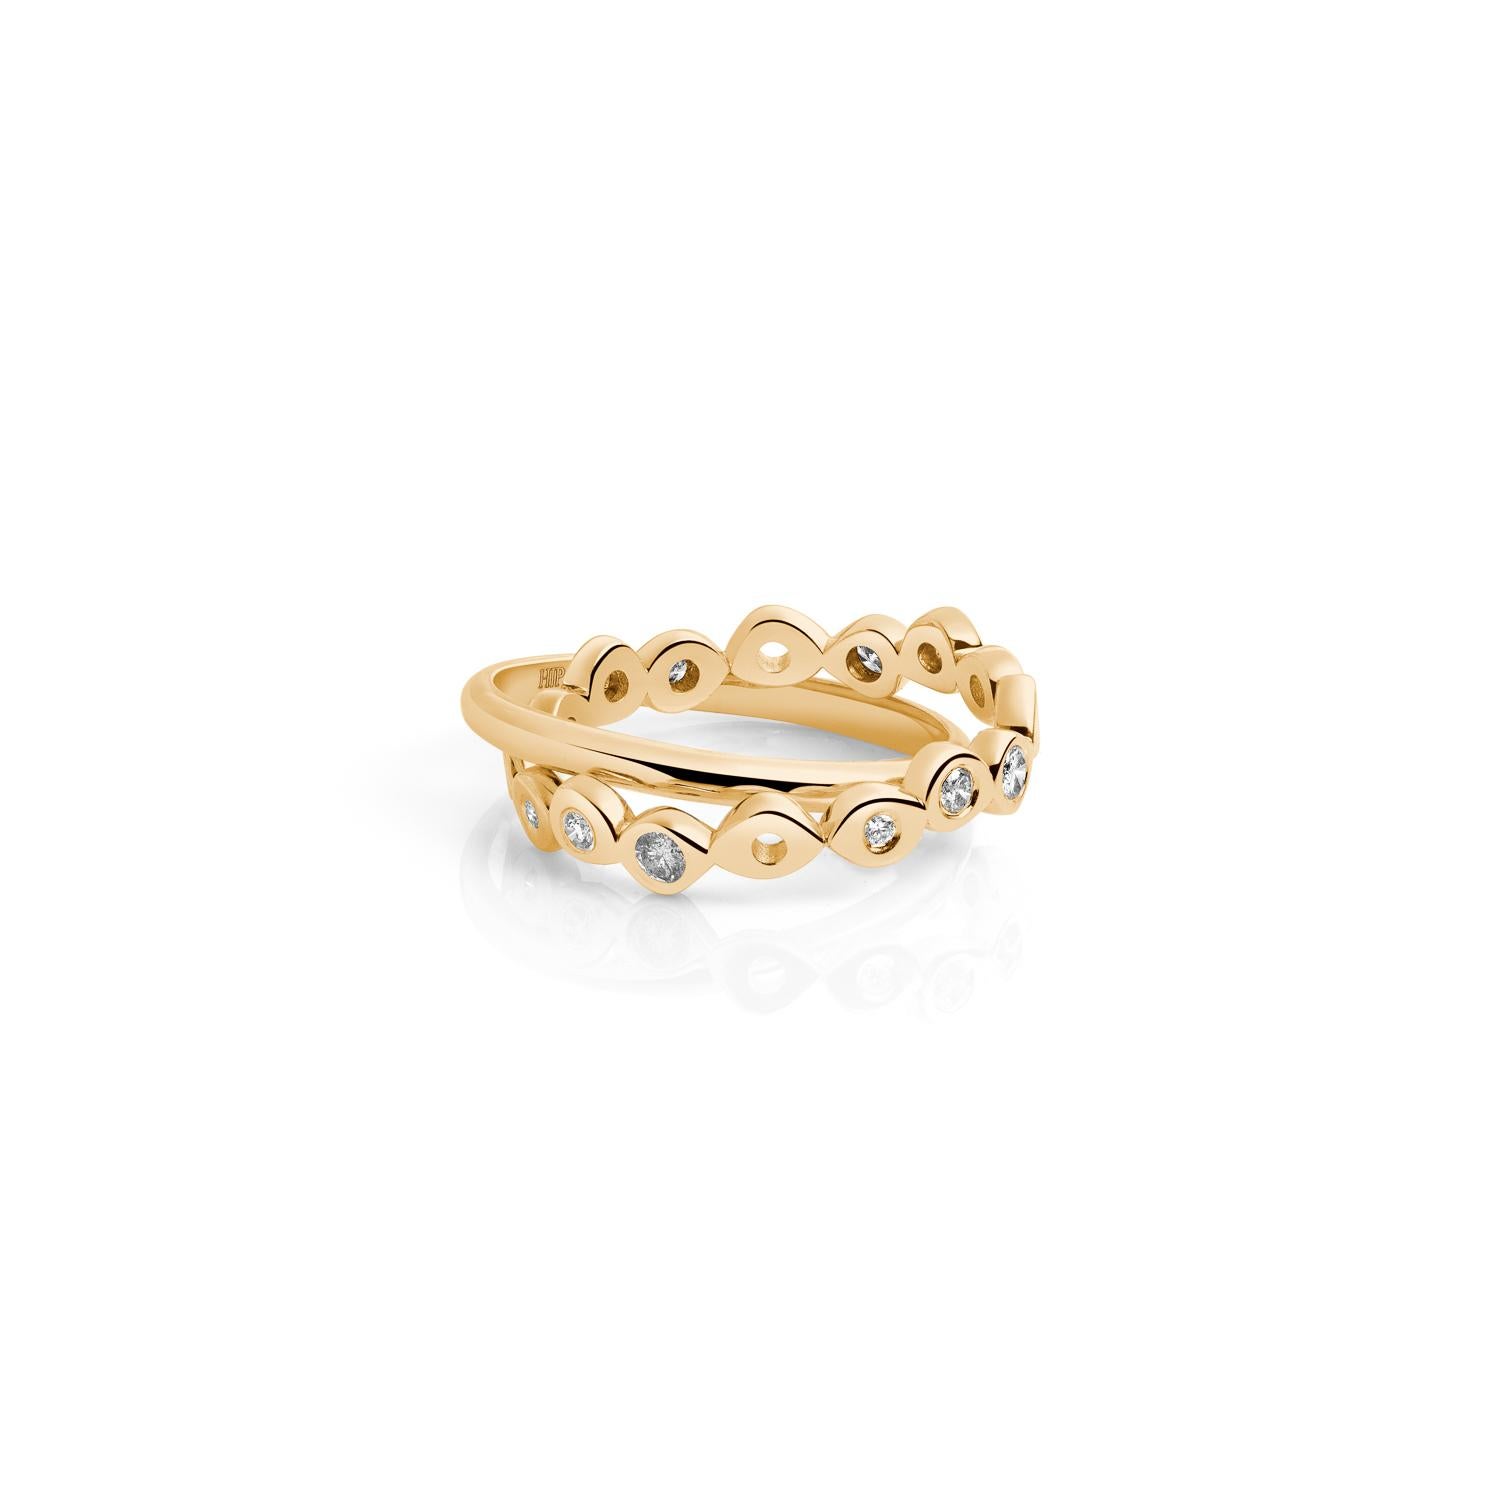 These two rolling ring bands are comfortable, make a statement and work great as alternative wedding bands. Hi June Parker's best selling Shadows ring band has been upgraded with a few more diamonds and connected to a plain half-round ring band for